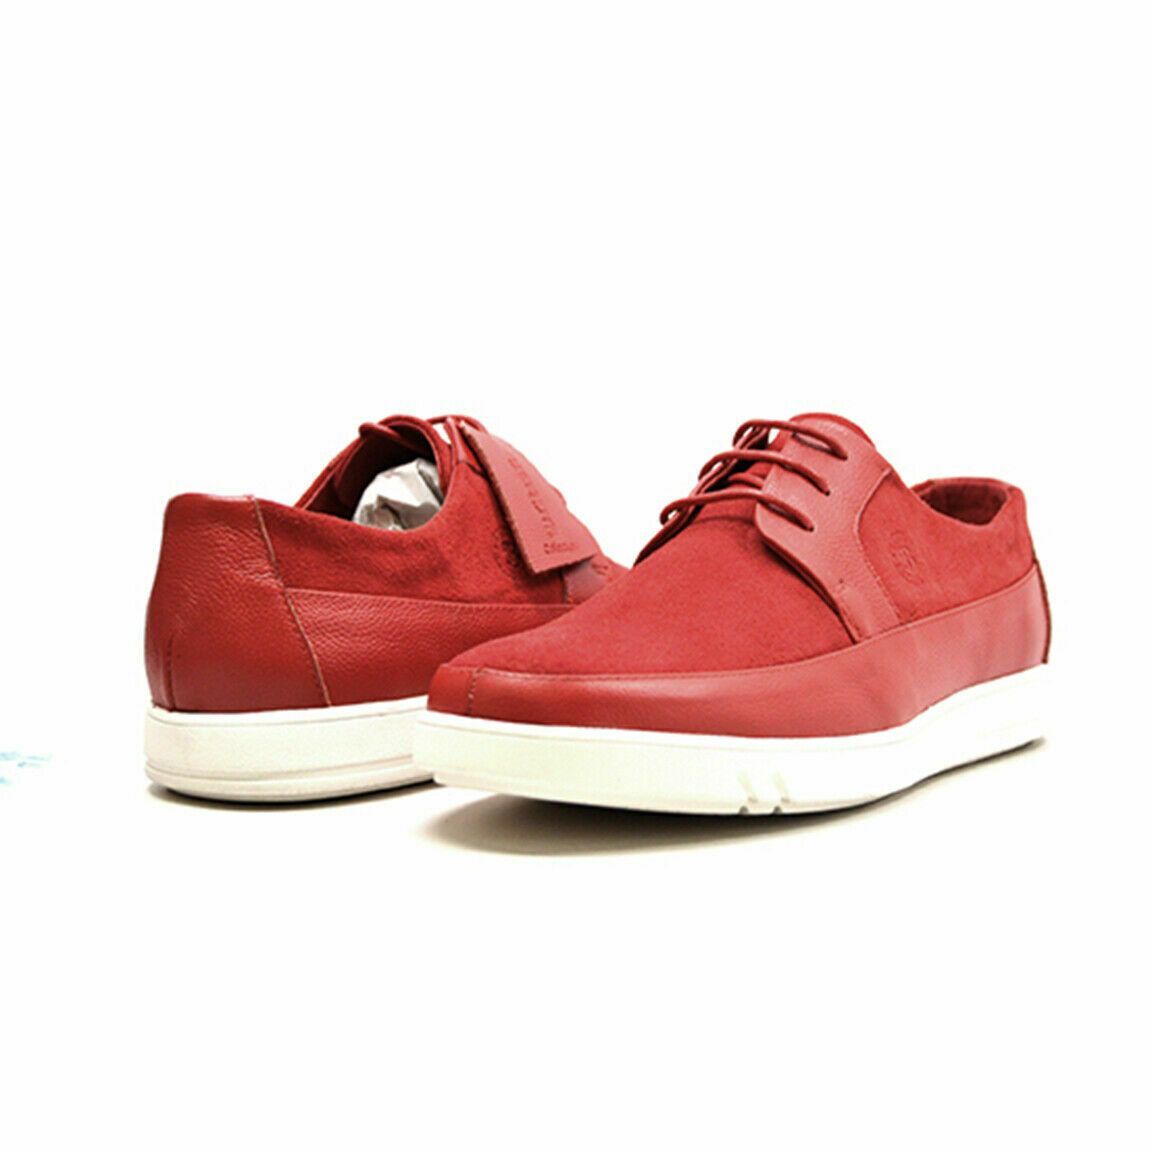 British Walkers Bally Style Westminster Men's Red Leather - Casual Shoes